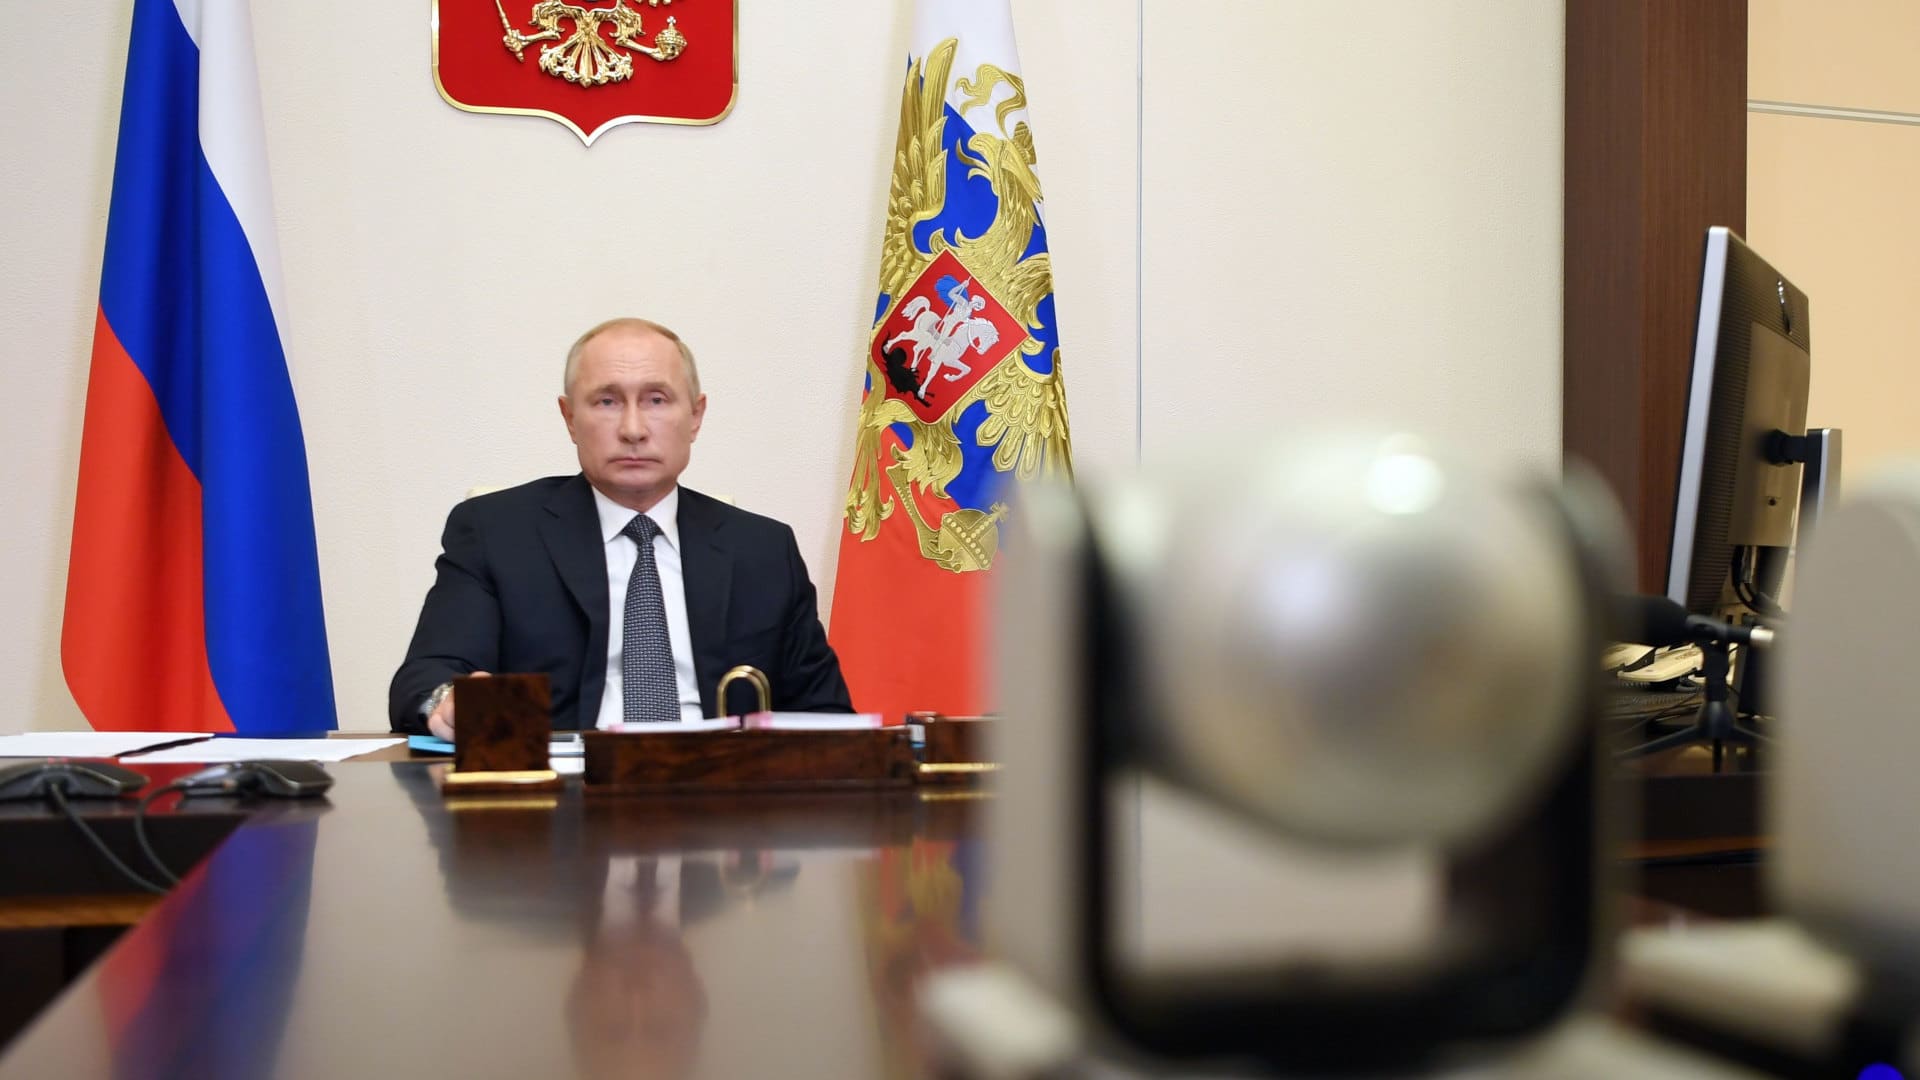 Russian President Vladimir Putin announced the Sputnik V vaccine during a teleconference meeting on August 11, 2020.